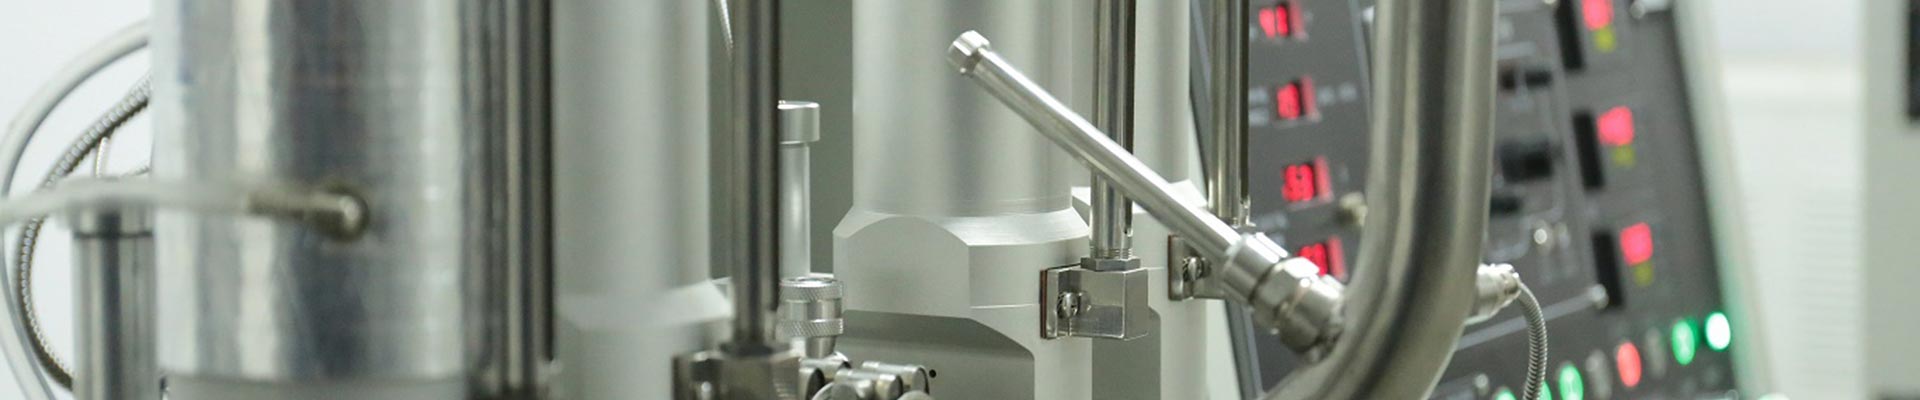 Automatic Reference Fuel Blending System Unit